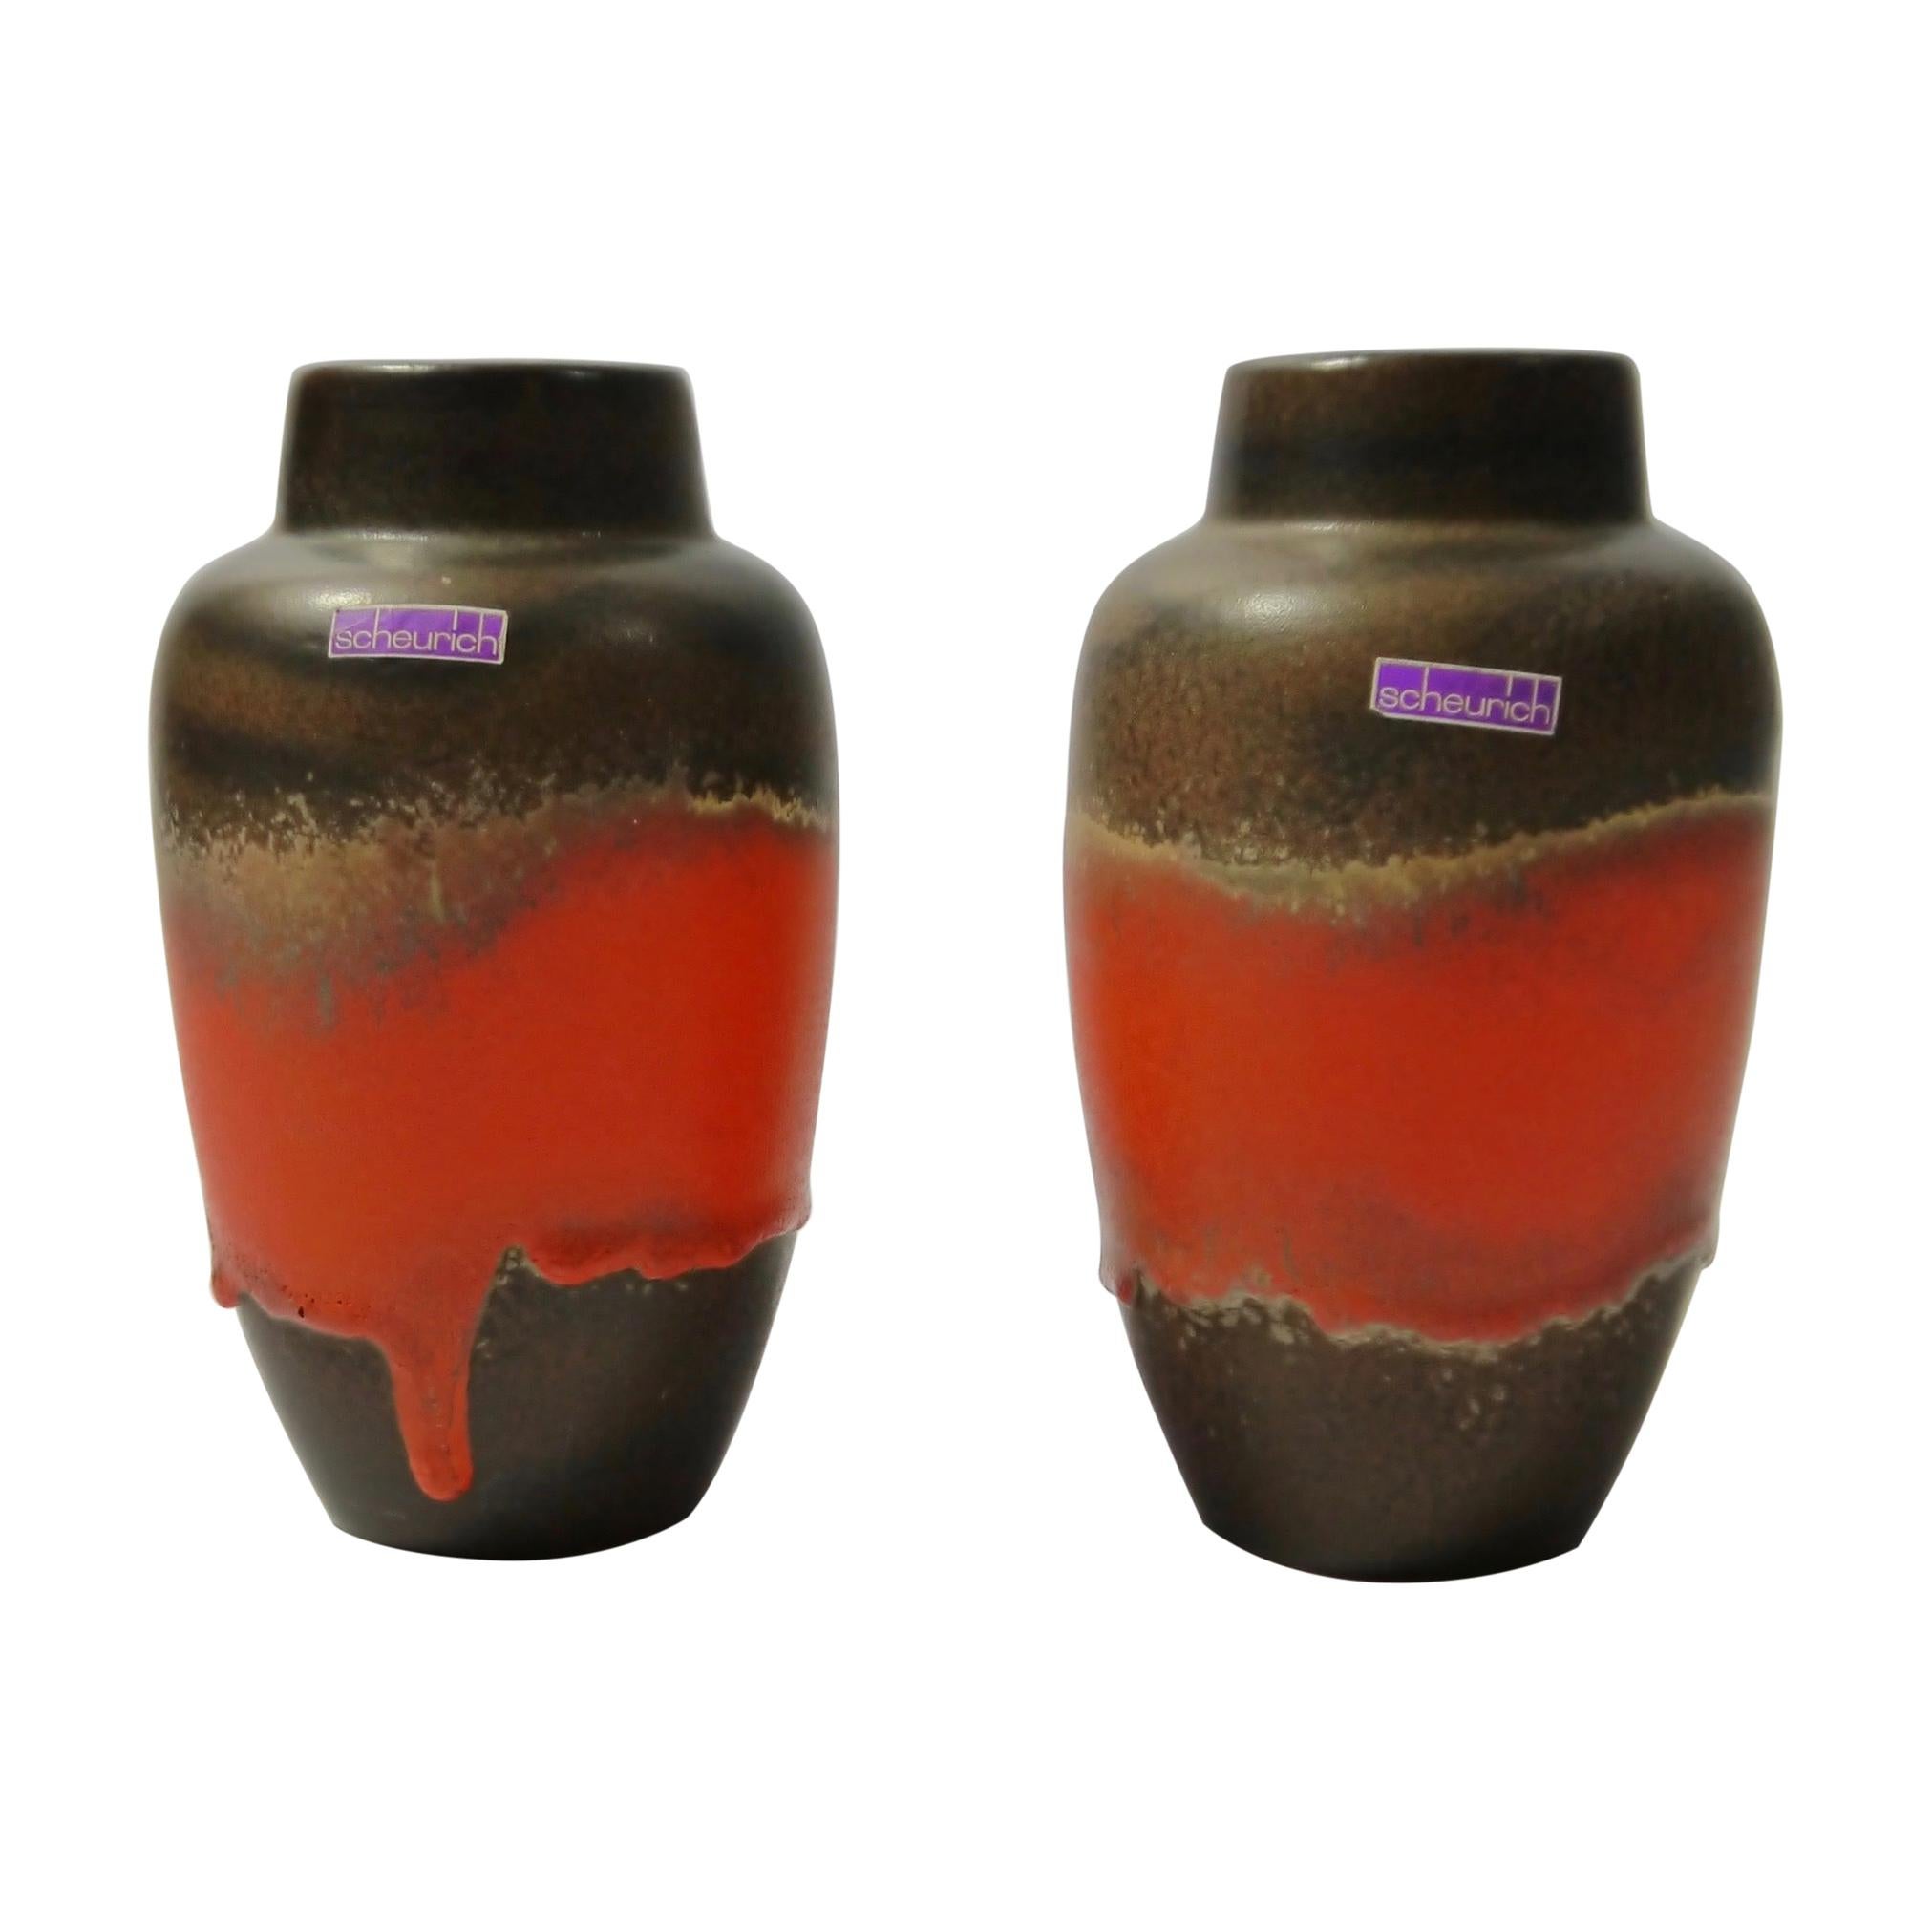 Pair of Fat Lava Ceramic Vases by Scheurich, West Germany, 1960s For Sale